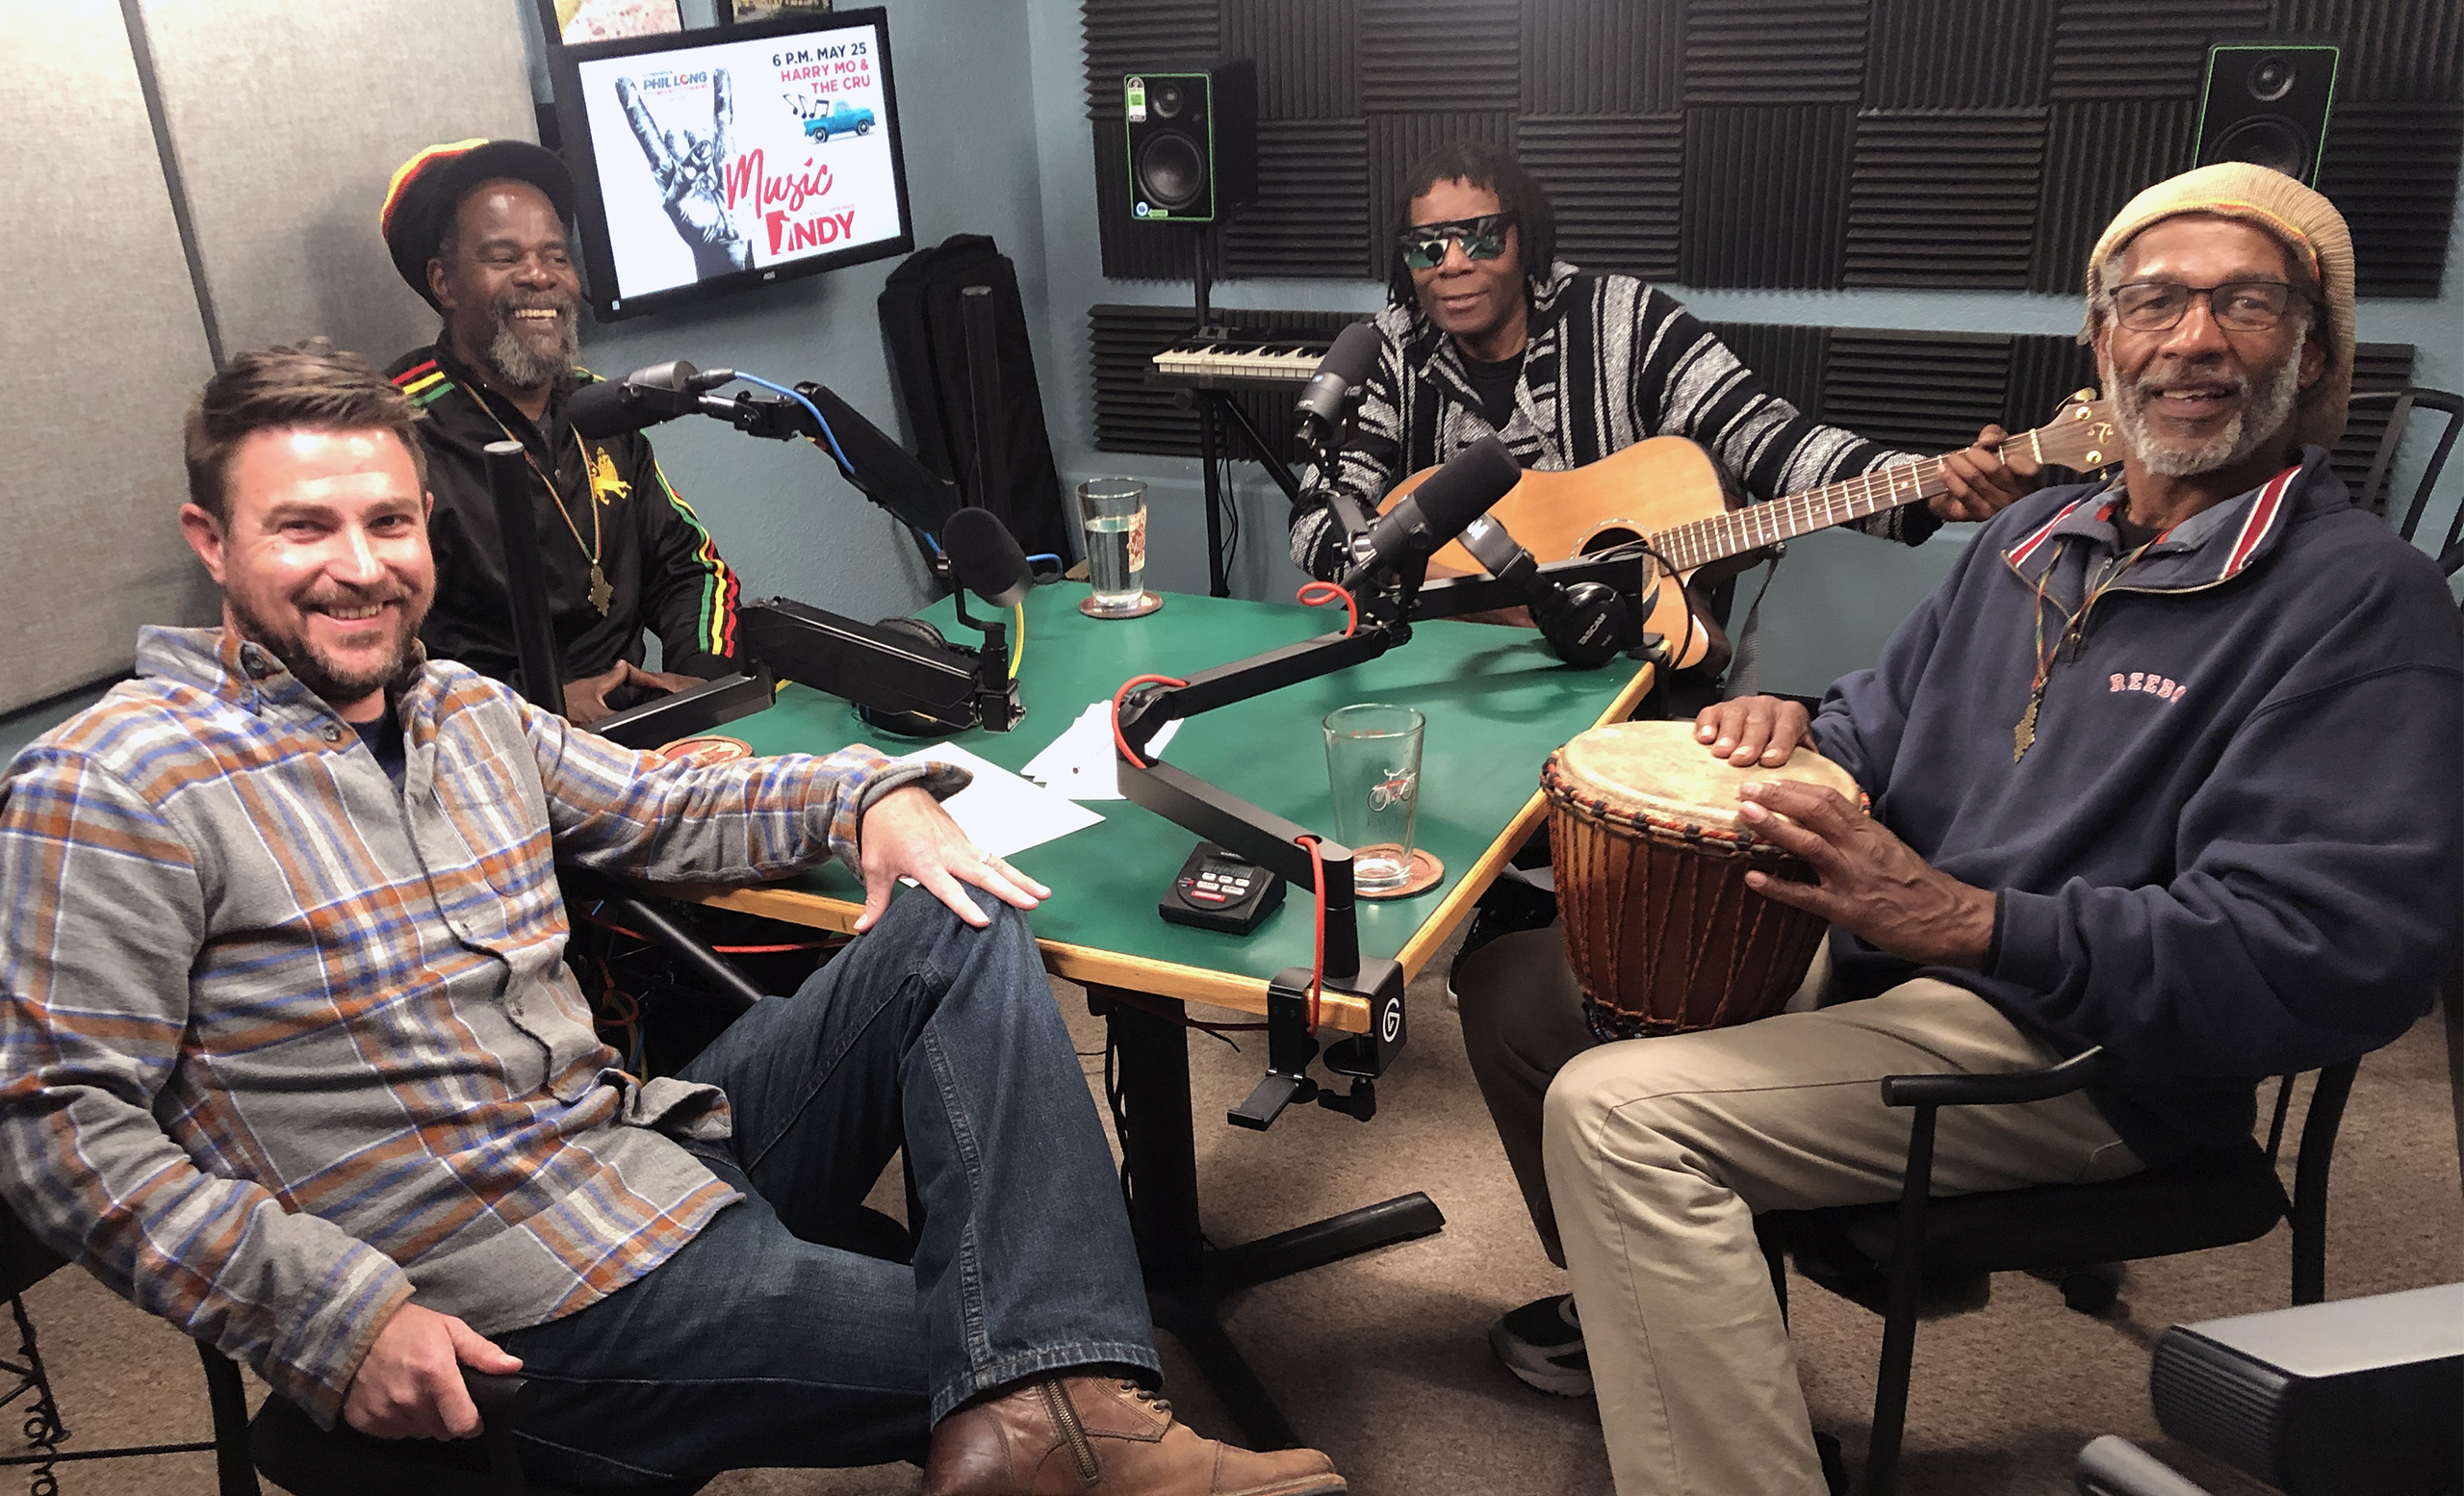 Bryan Grossman in studio with Harry Mo and the CRU